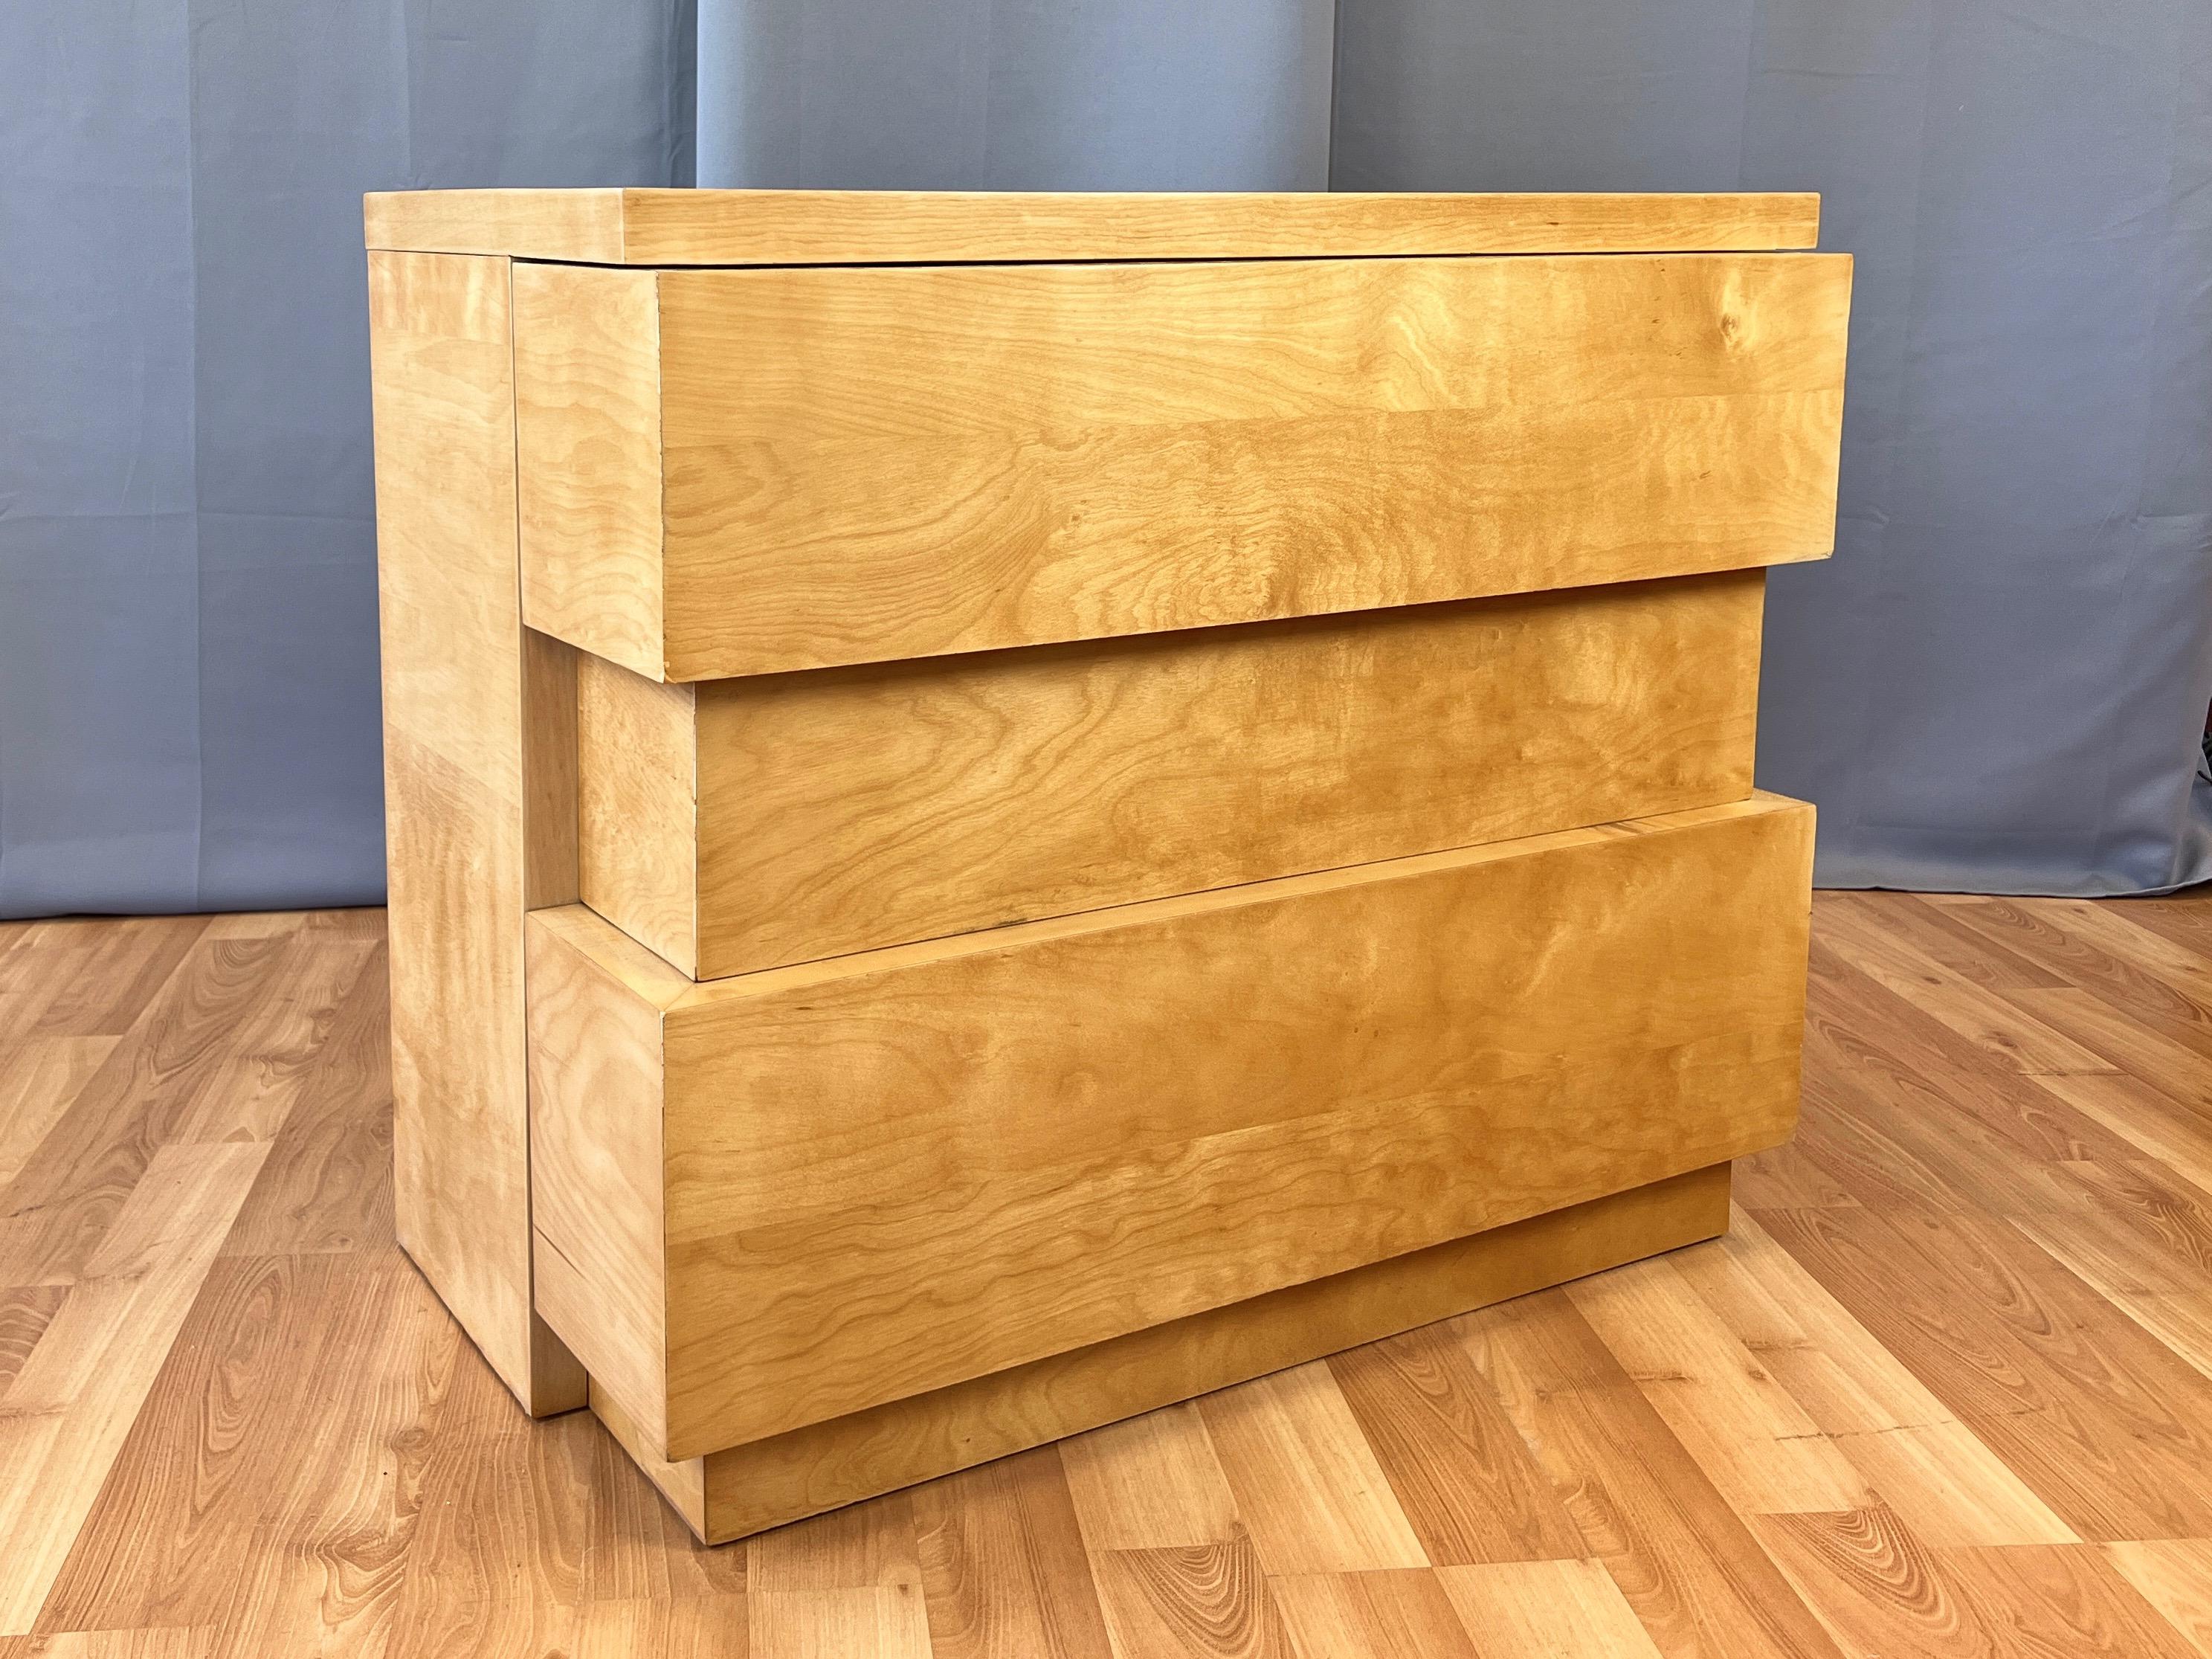 A rare 1946–1947 mid-century modern three-drawer chest or dresser in maple by Dan Johnson for Hayden Hall.

Early piece in a prescient contemporary-looking minimalist geometric style specific to a collection he did for Hayden Hall. Represents an